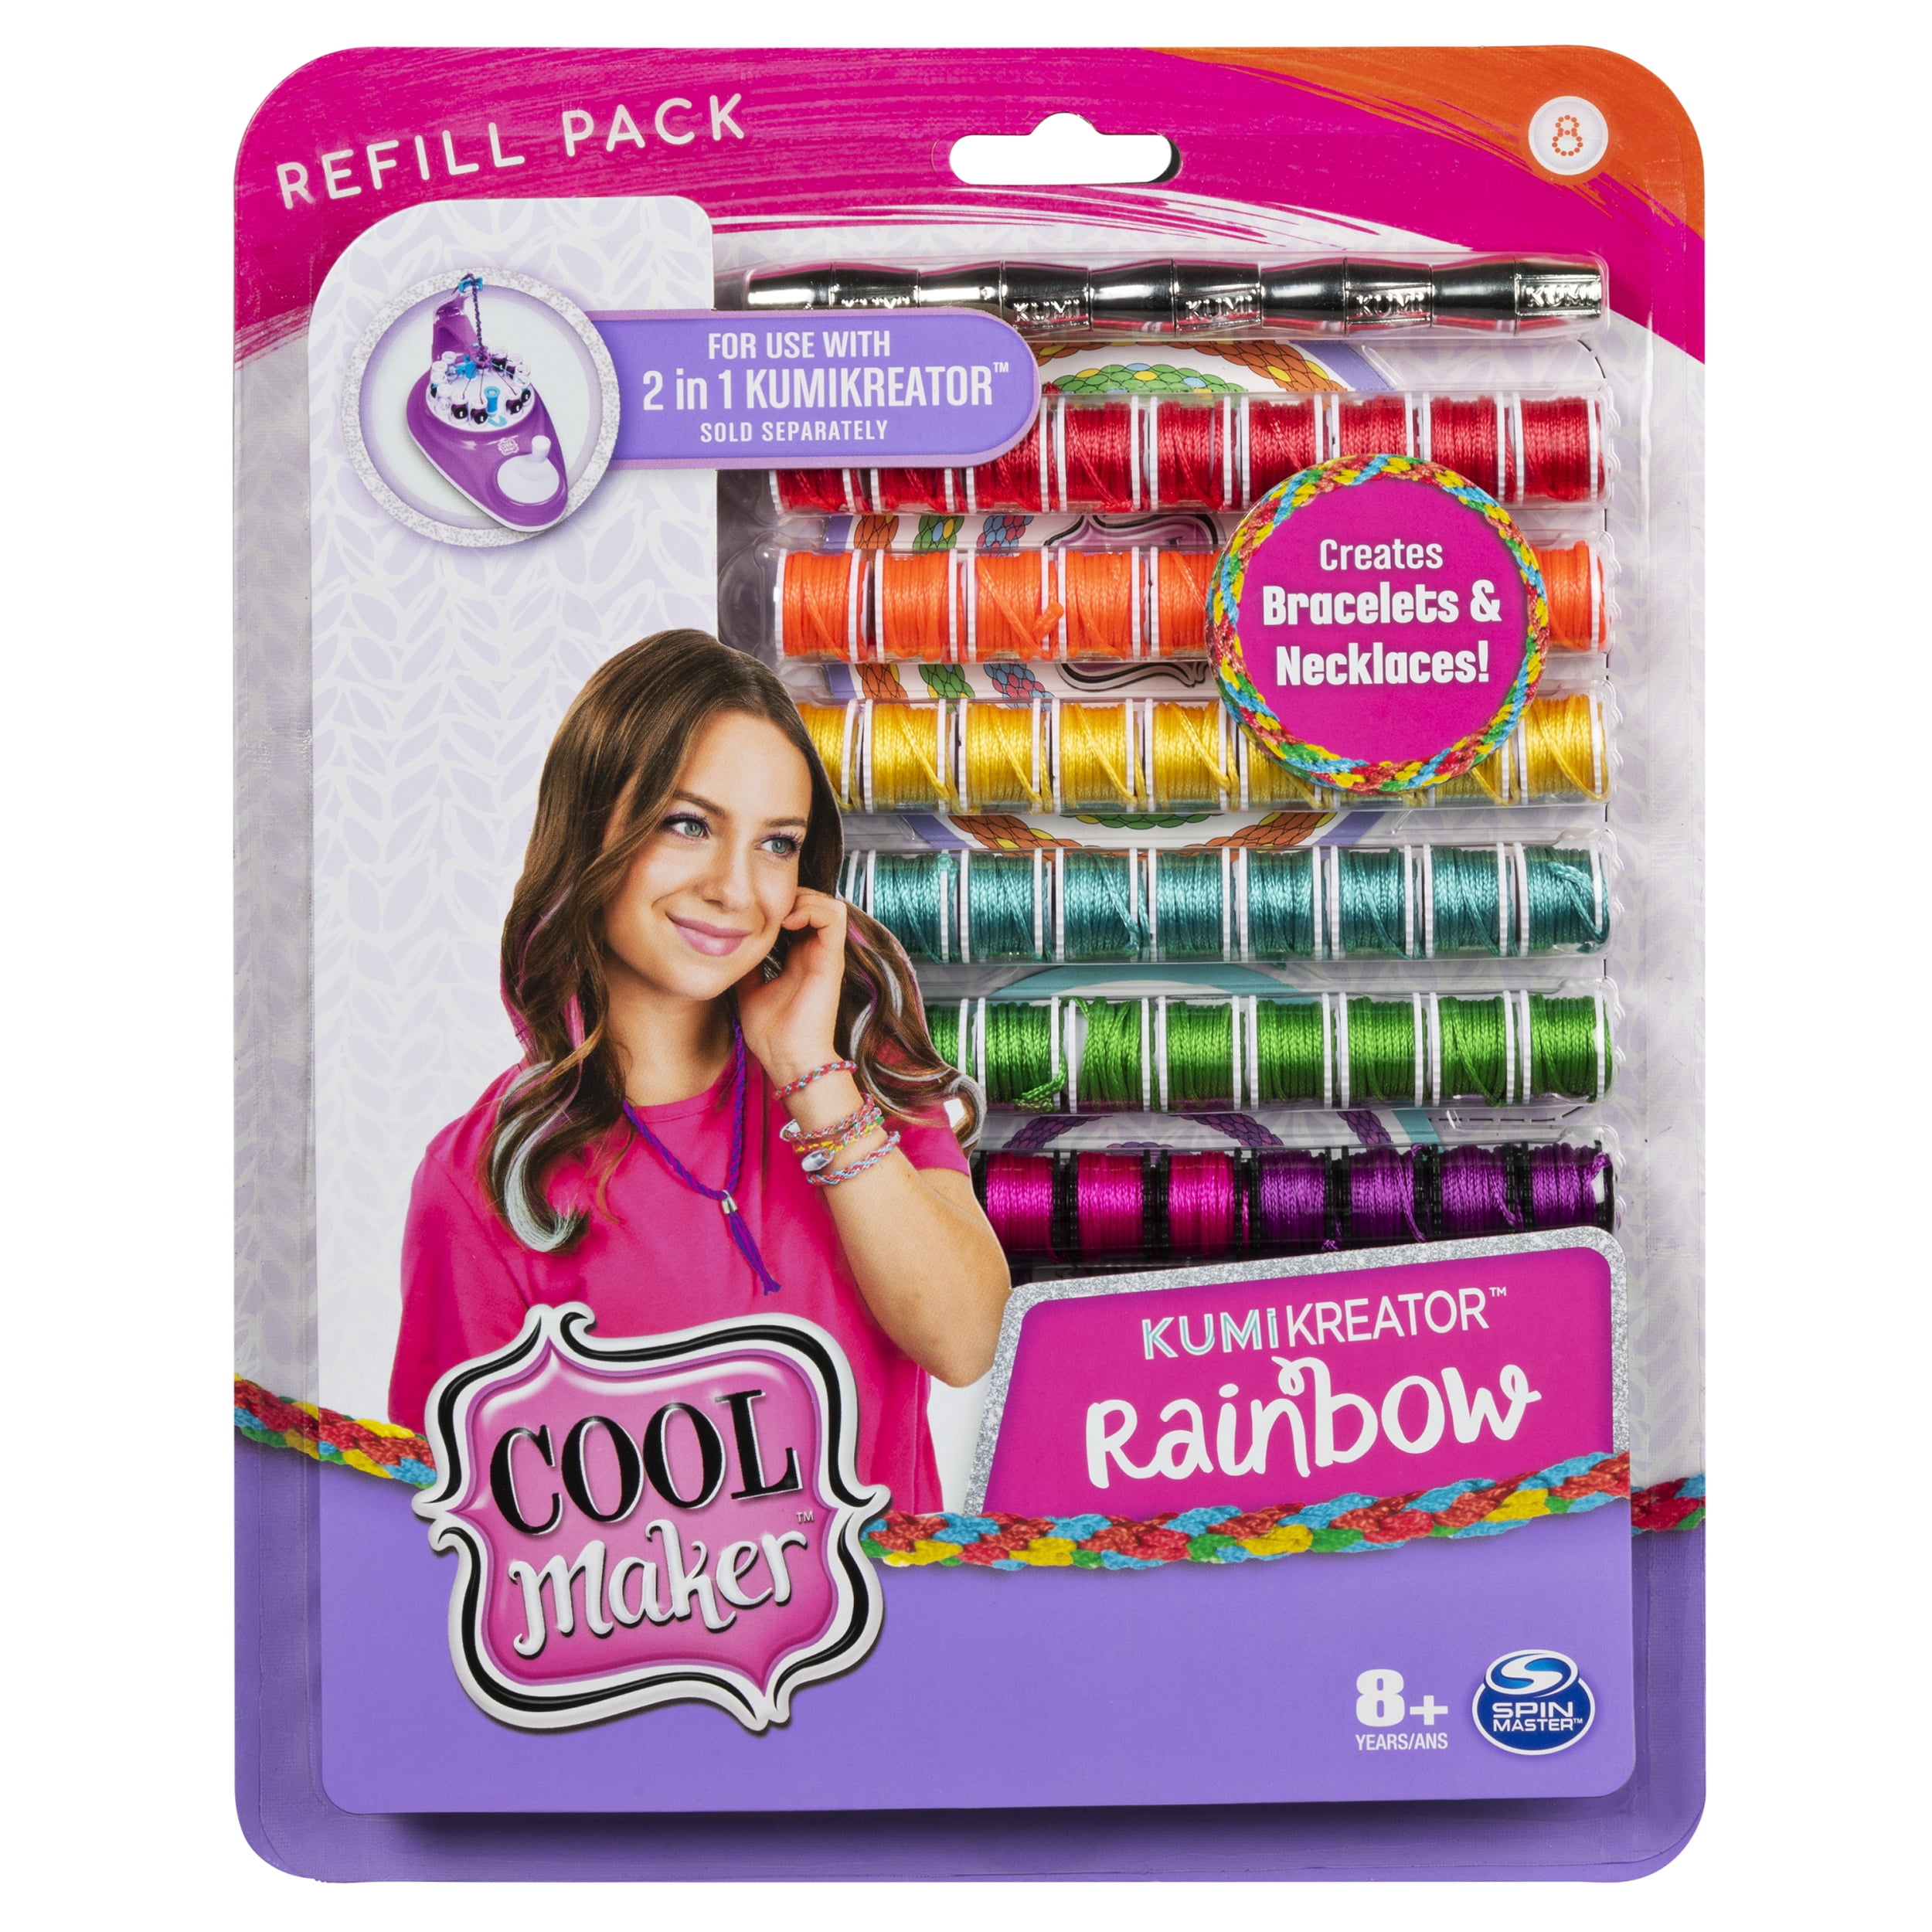 Cool Maker, KumiKreator Rainbow Fashion Pack Refill, Friendship Bracelet  and Necklace Activity Kit